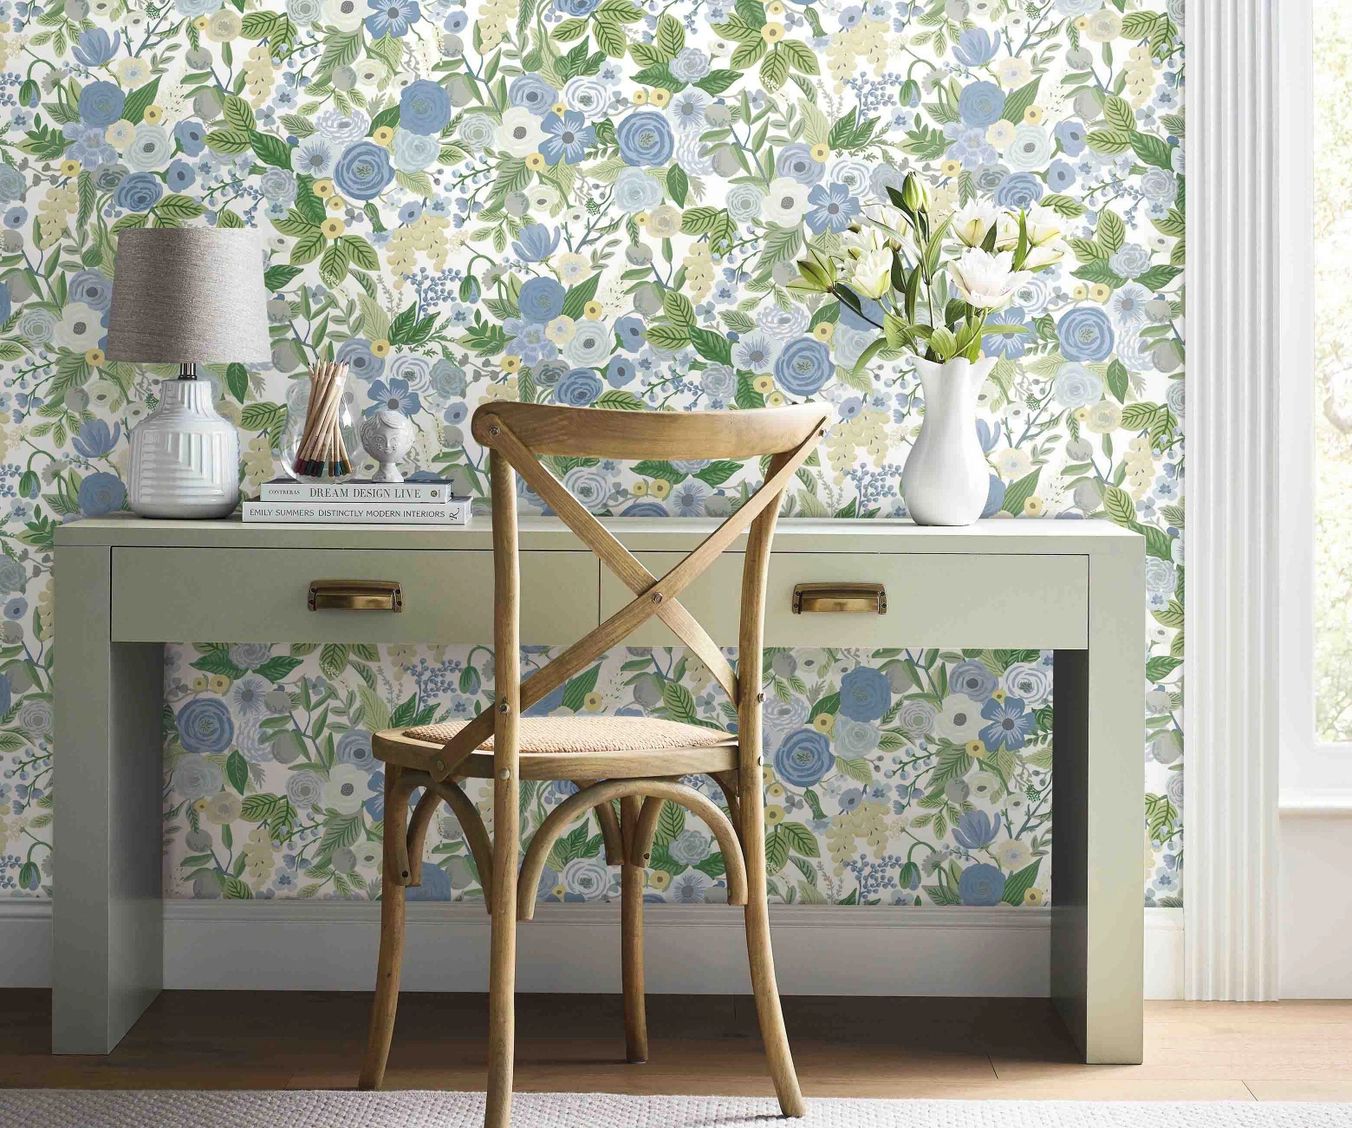 Wallpaper Sample with ForgetMeNots Jigsaw Puzzle by William Morris   Pixels